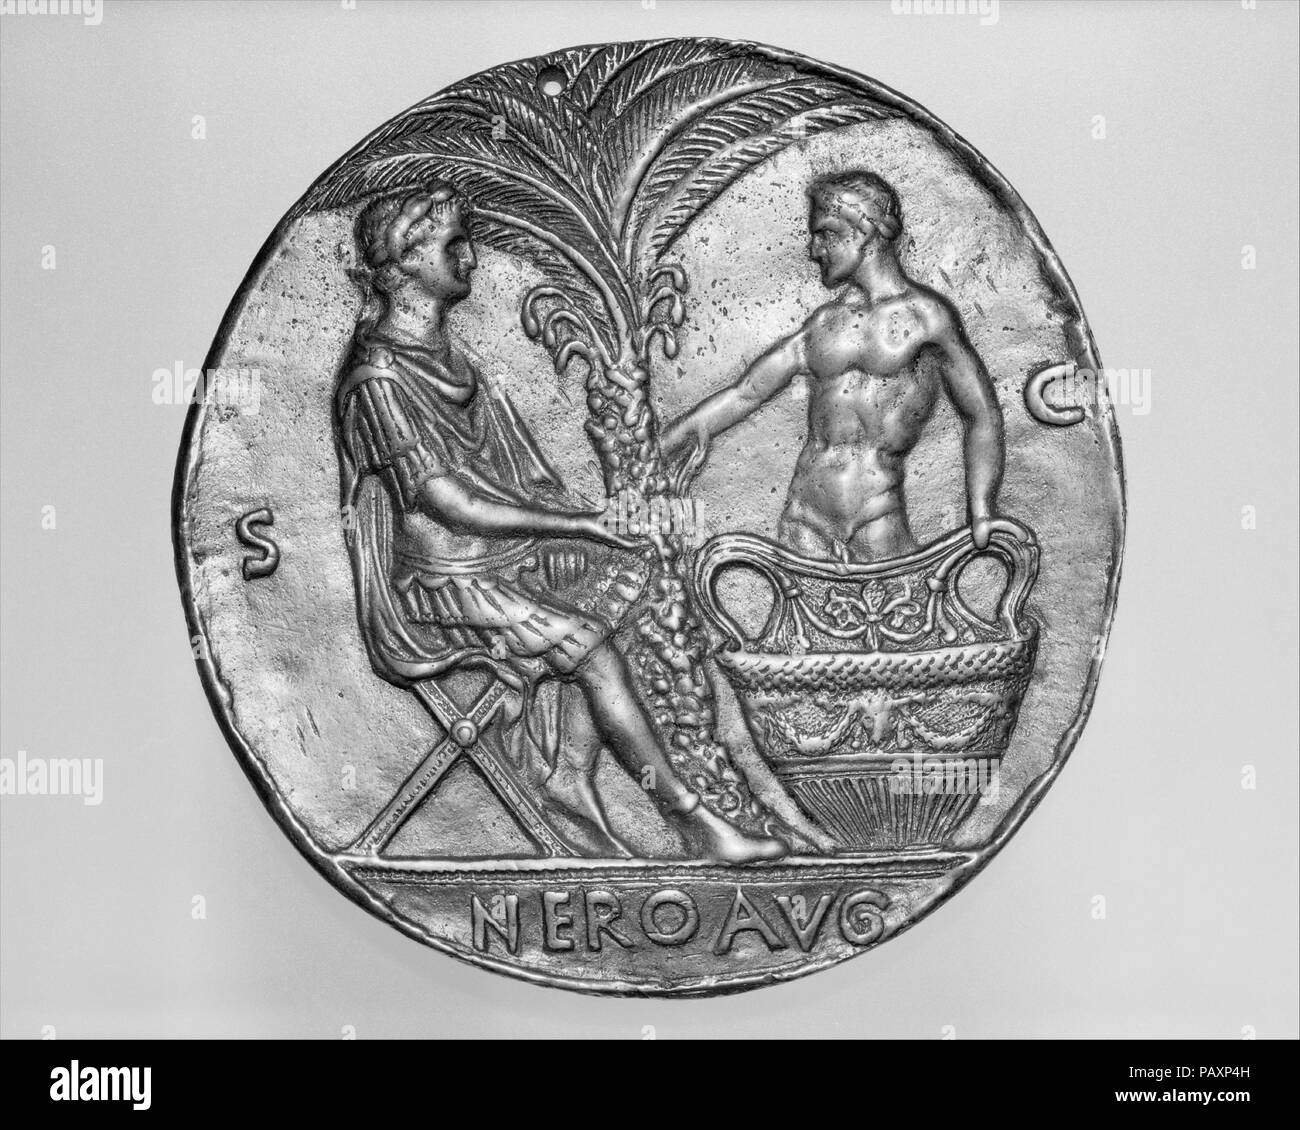 Nero and the Dying Seneca. Artist: After a design by Master of the Roman Emperors (active mid-15th century). Culture: possibly Italian, Rome. Dimensions: Diameter: 4 1/8 in. (105 mm). Date: ca. 1445.  This is a uniface cast of the reverse of a medal of Nero, the obverse of which shows his bust to the right. It is the work of an unidentified medallist, active in the 15th century, who specialized in pastiches of ancient Roman coins enlarged in scale. He habitually included the initials S[enatus] C[onsulto] ('by order of the Senate') which he had observed on such coins. Museum: Metropolitan Museu Stock Photo